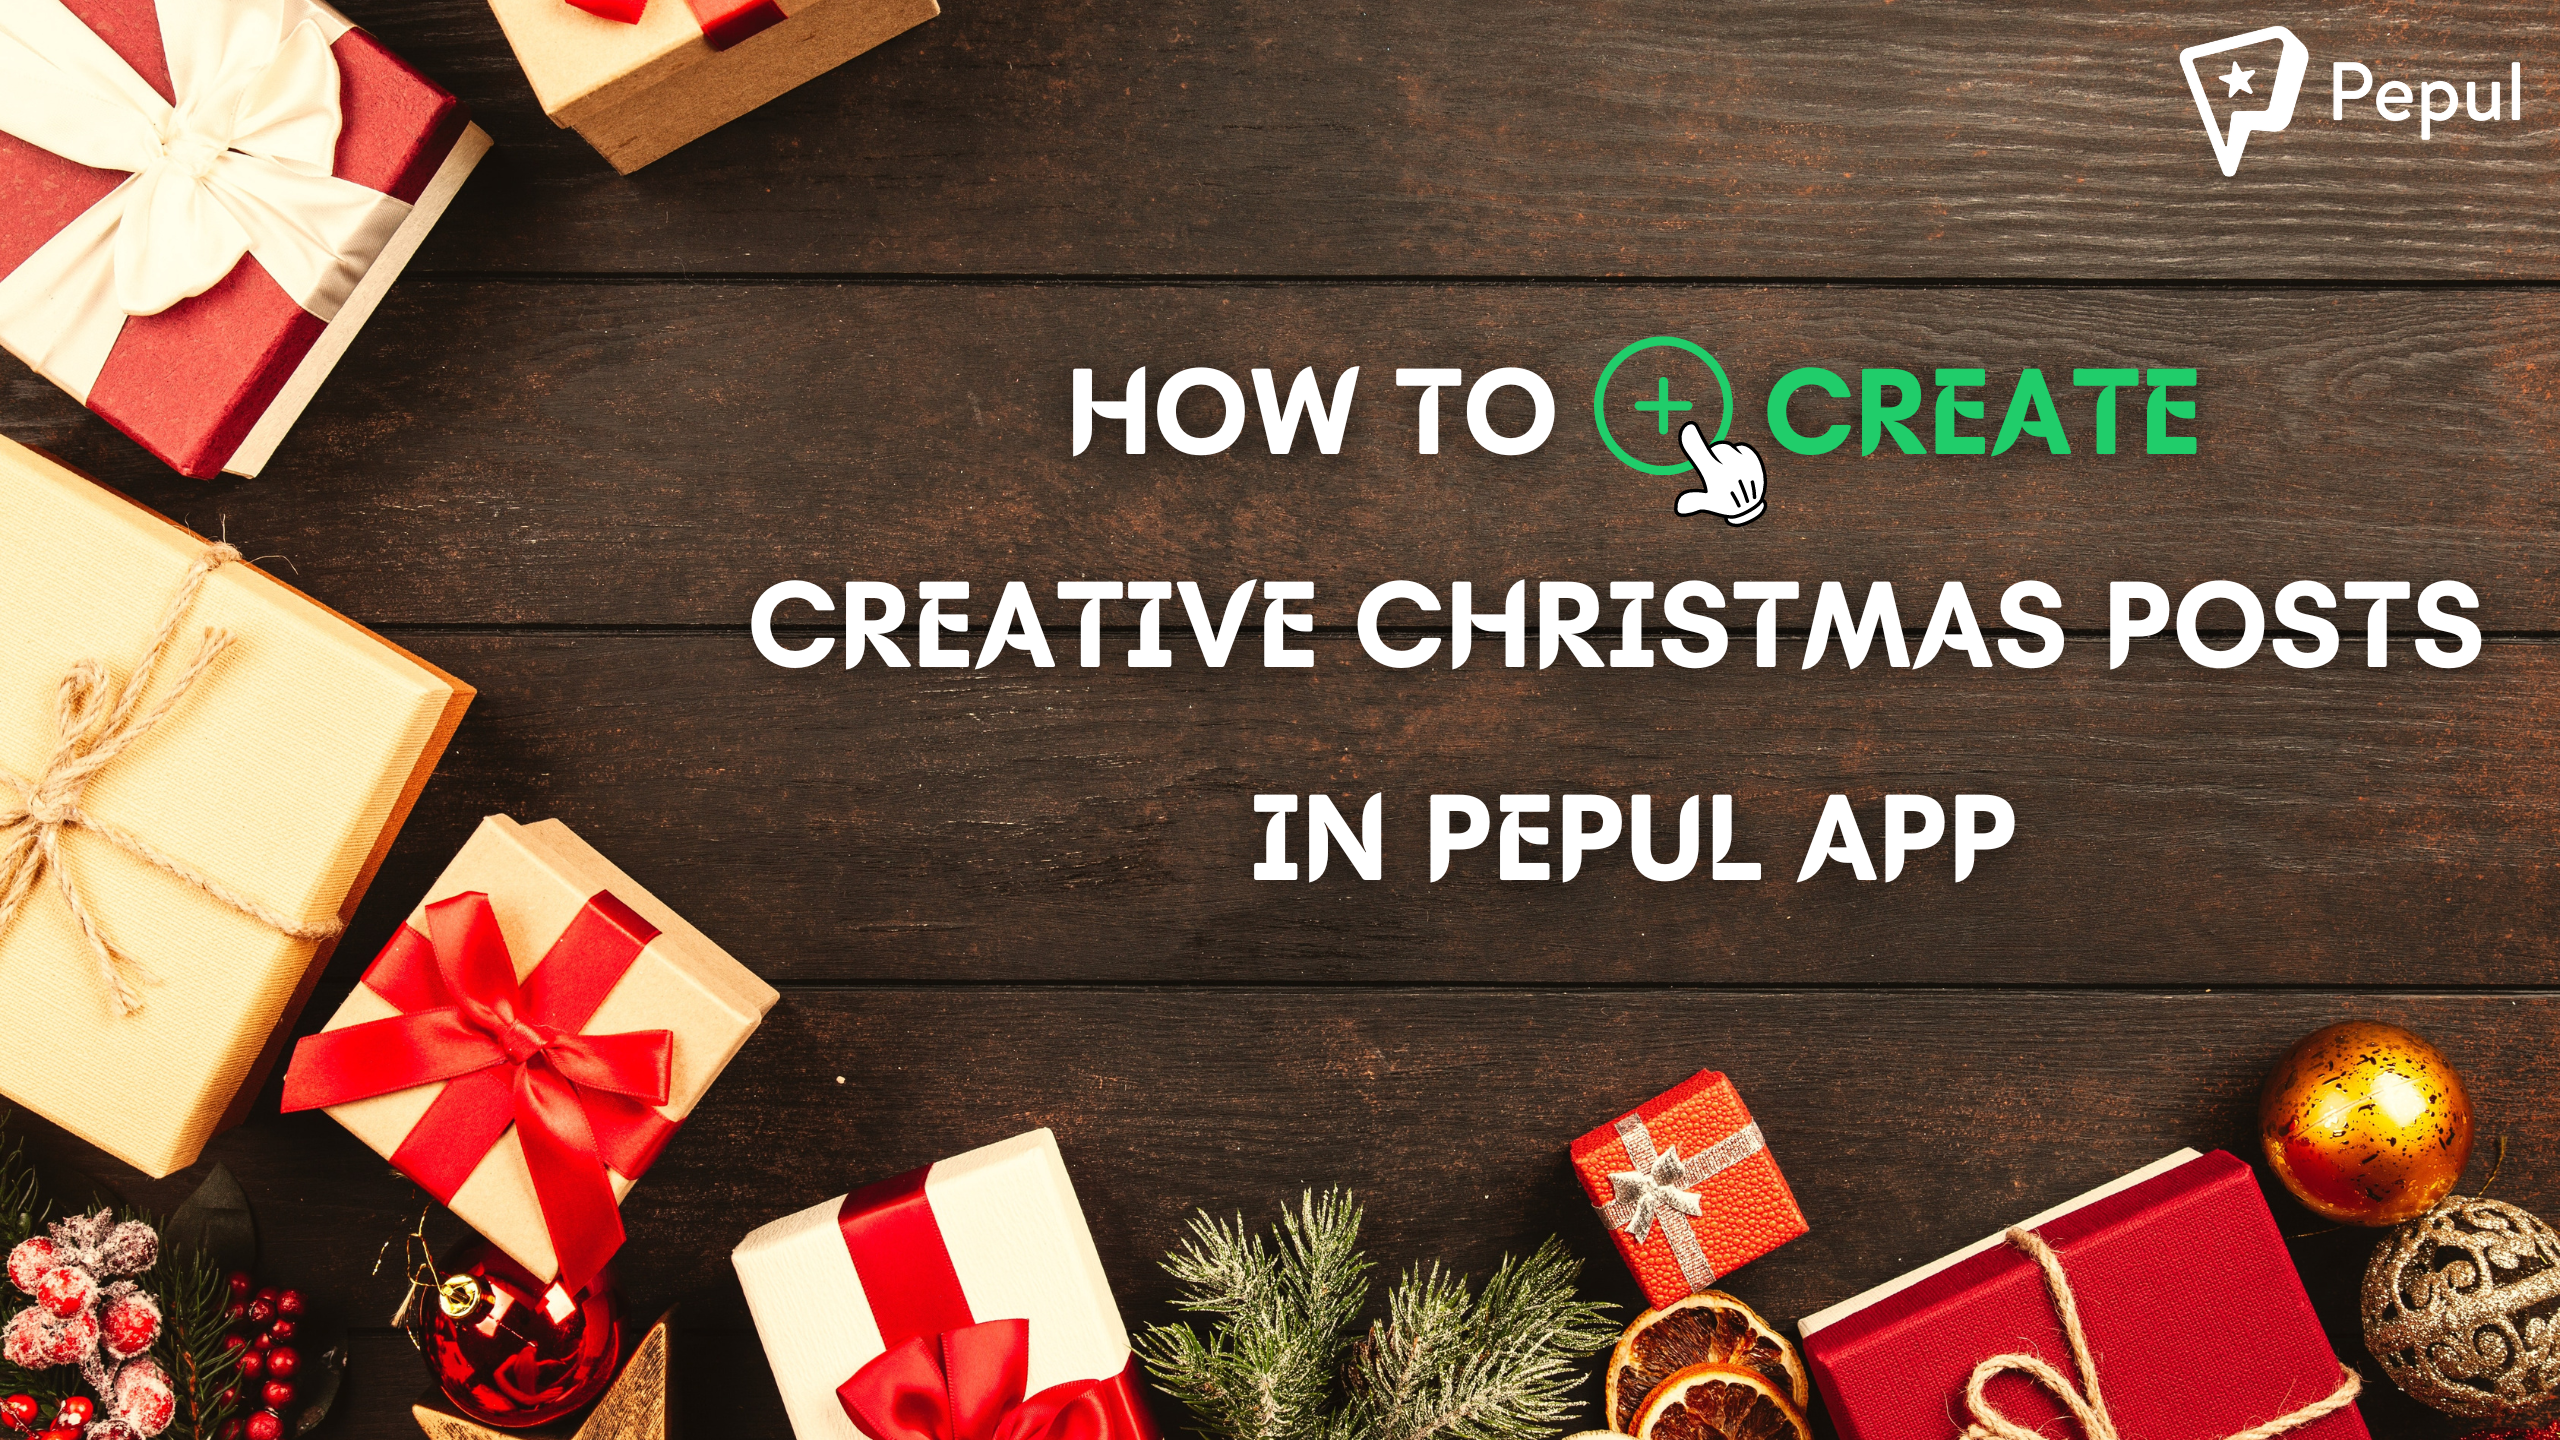 How to Create Creative Christmas Posts in the Pepul app?